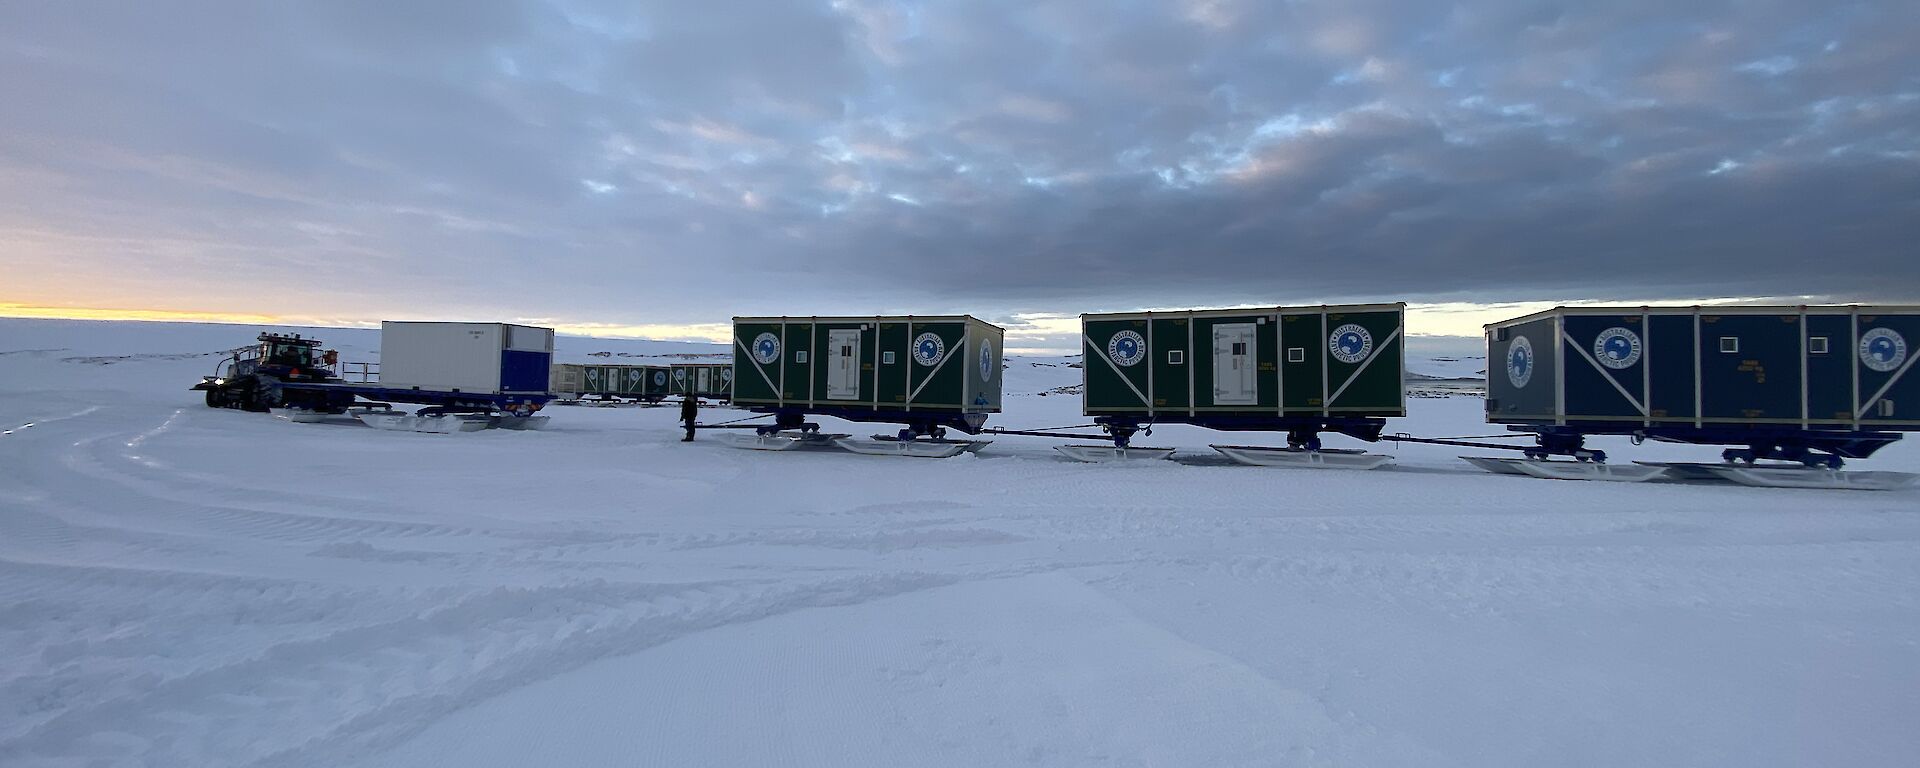 A series of rectangular cabins mounted on skis, hitched together to be towed by tractor across the snow.